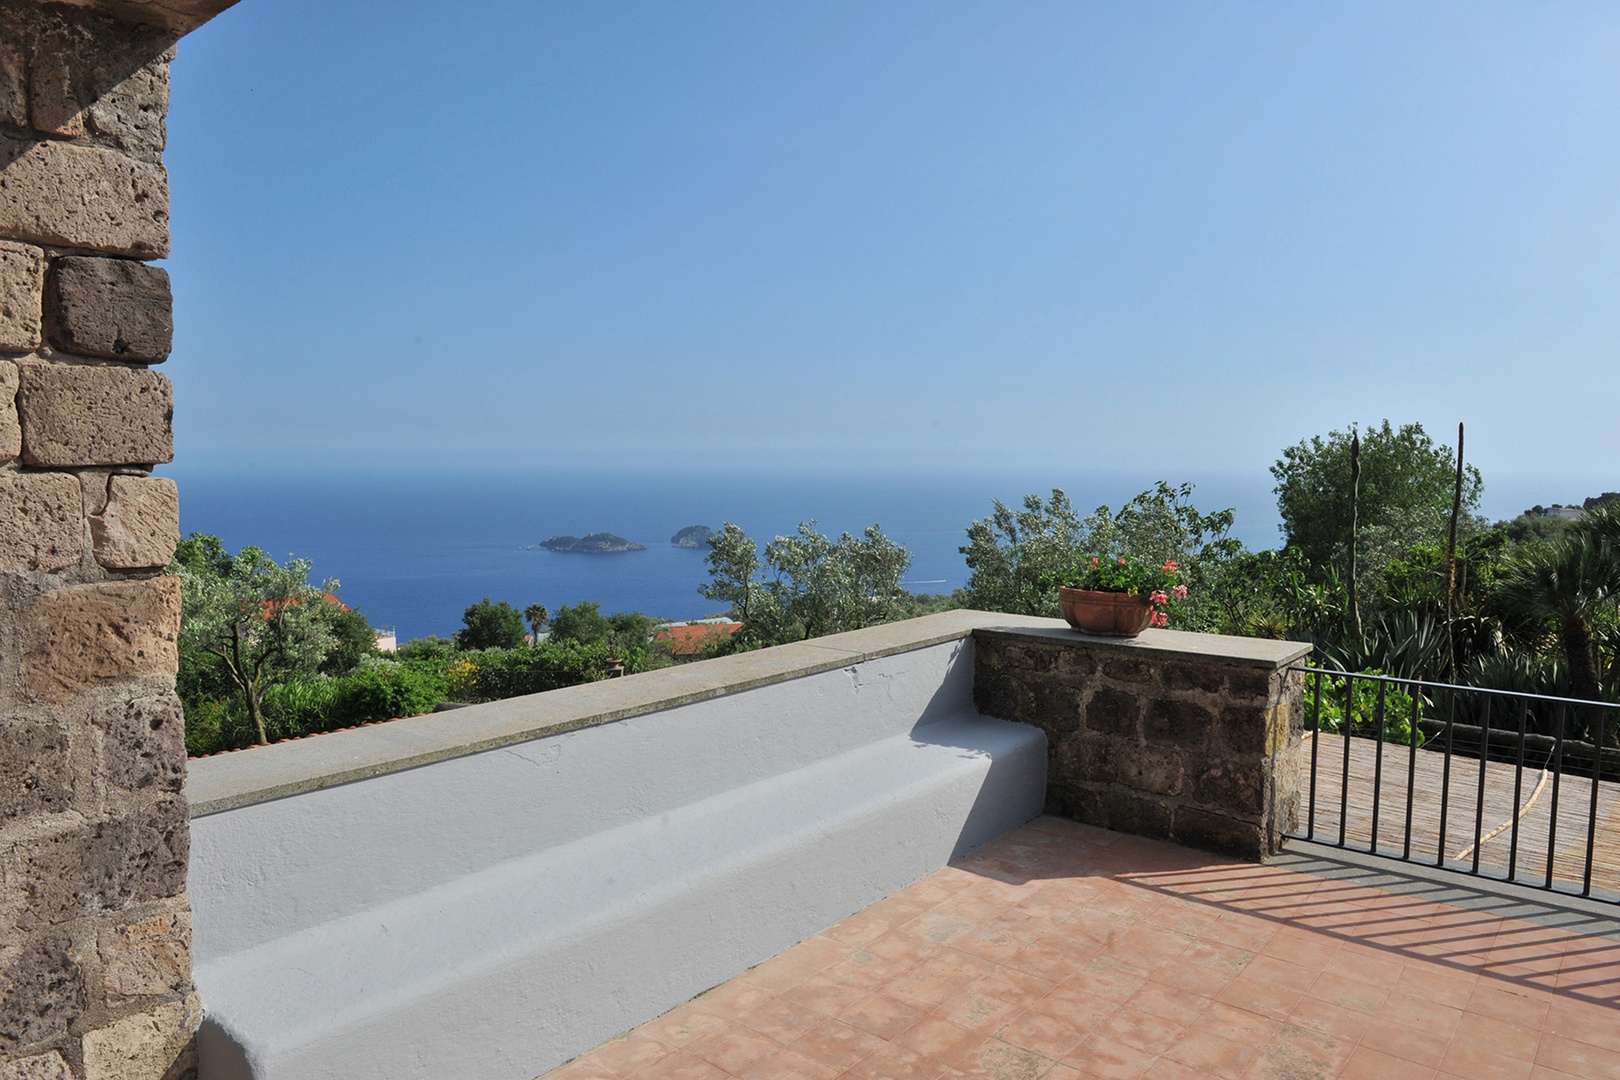 A large, sunny terrace reached from the exterior of the villa is right outside the two top bedrooms.